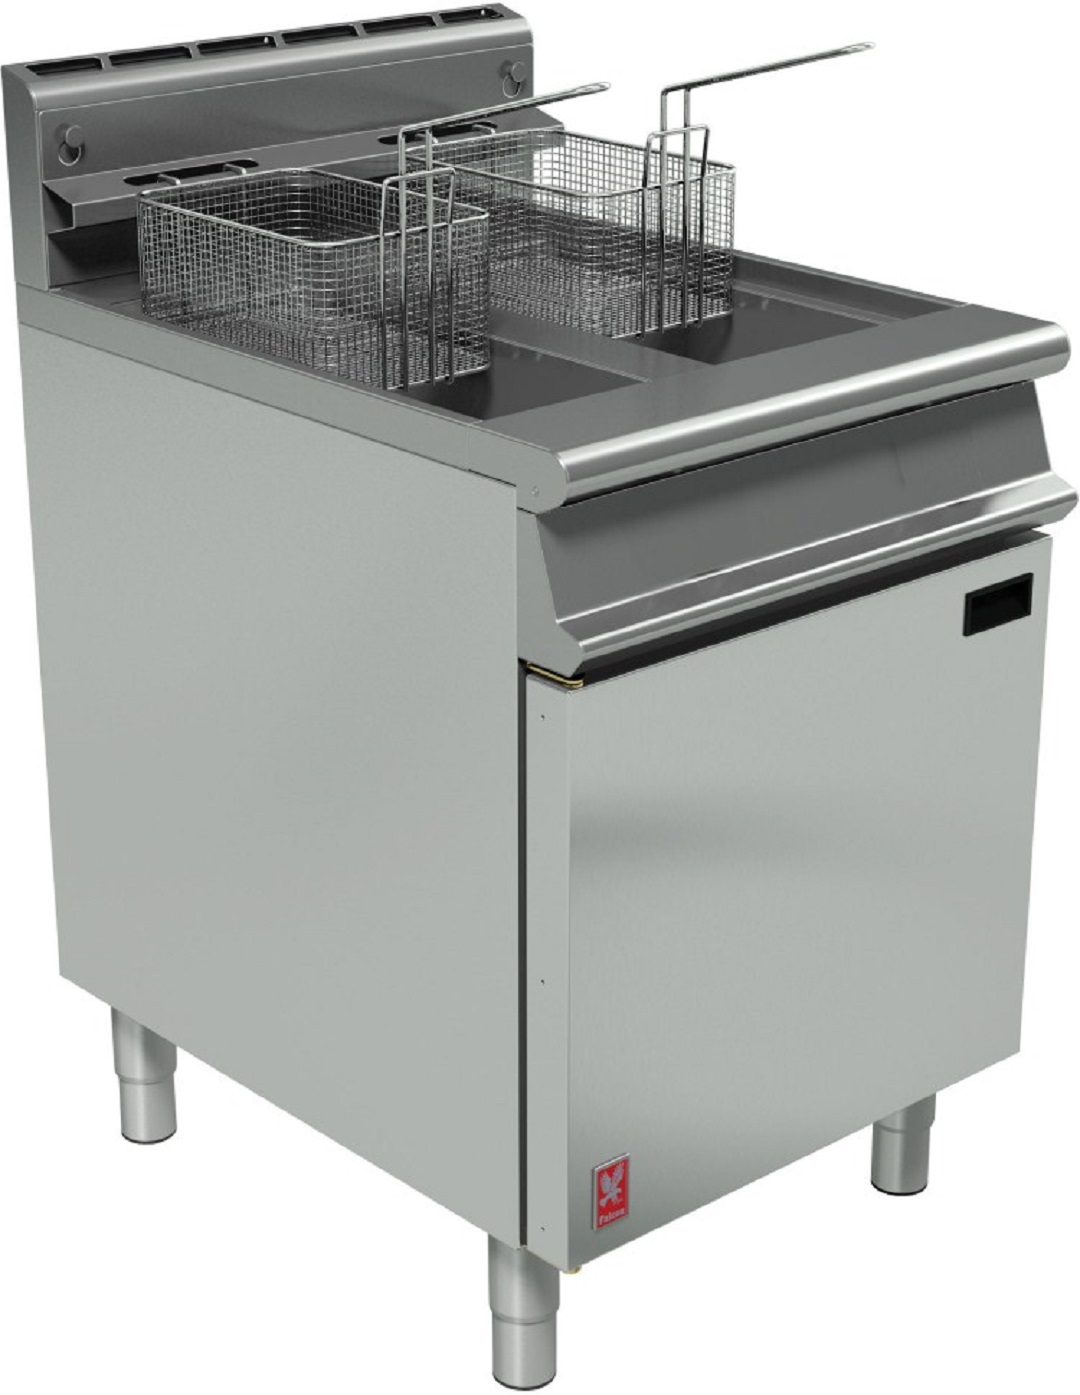 Falcon Dominator PLUS G3865F Twin Pan Fryer With In-Built Filtration